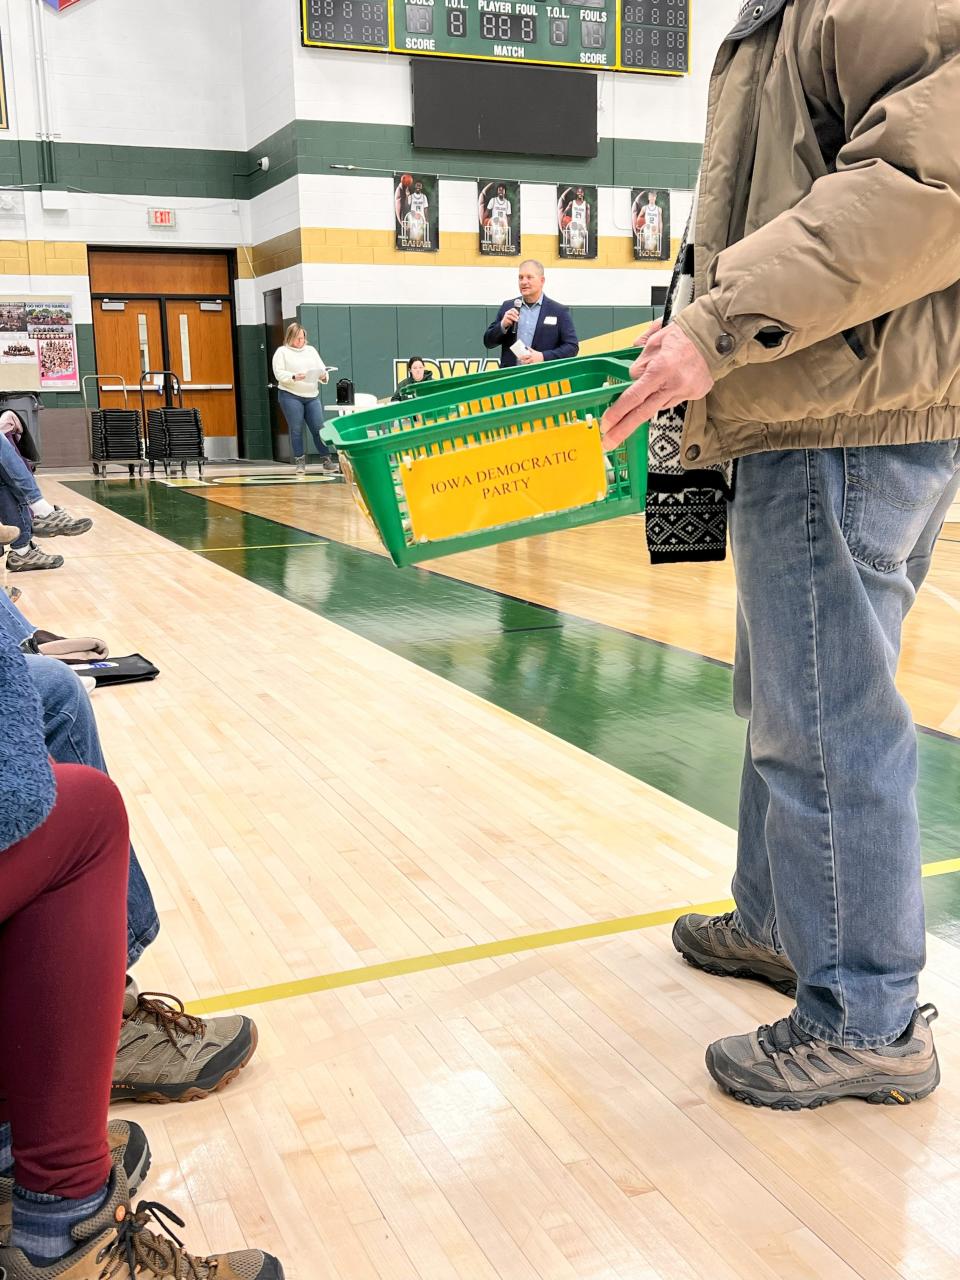 The Iowa Democratic Party and Johnson County Democratic Party collected donations during a caucus at Iowa City West High Monday, Jan. 15.